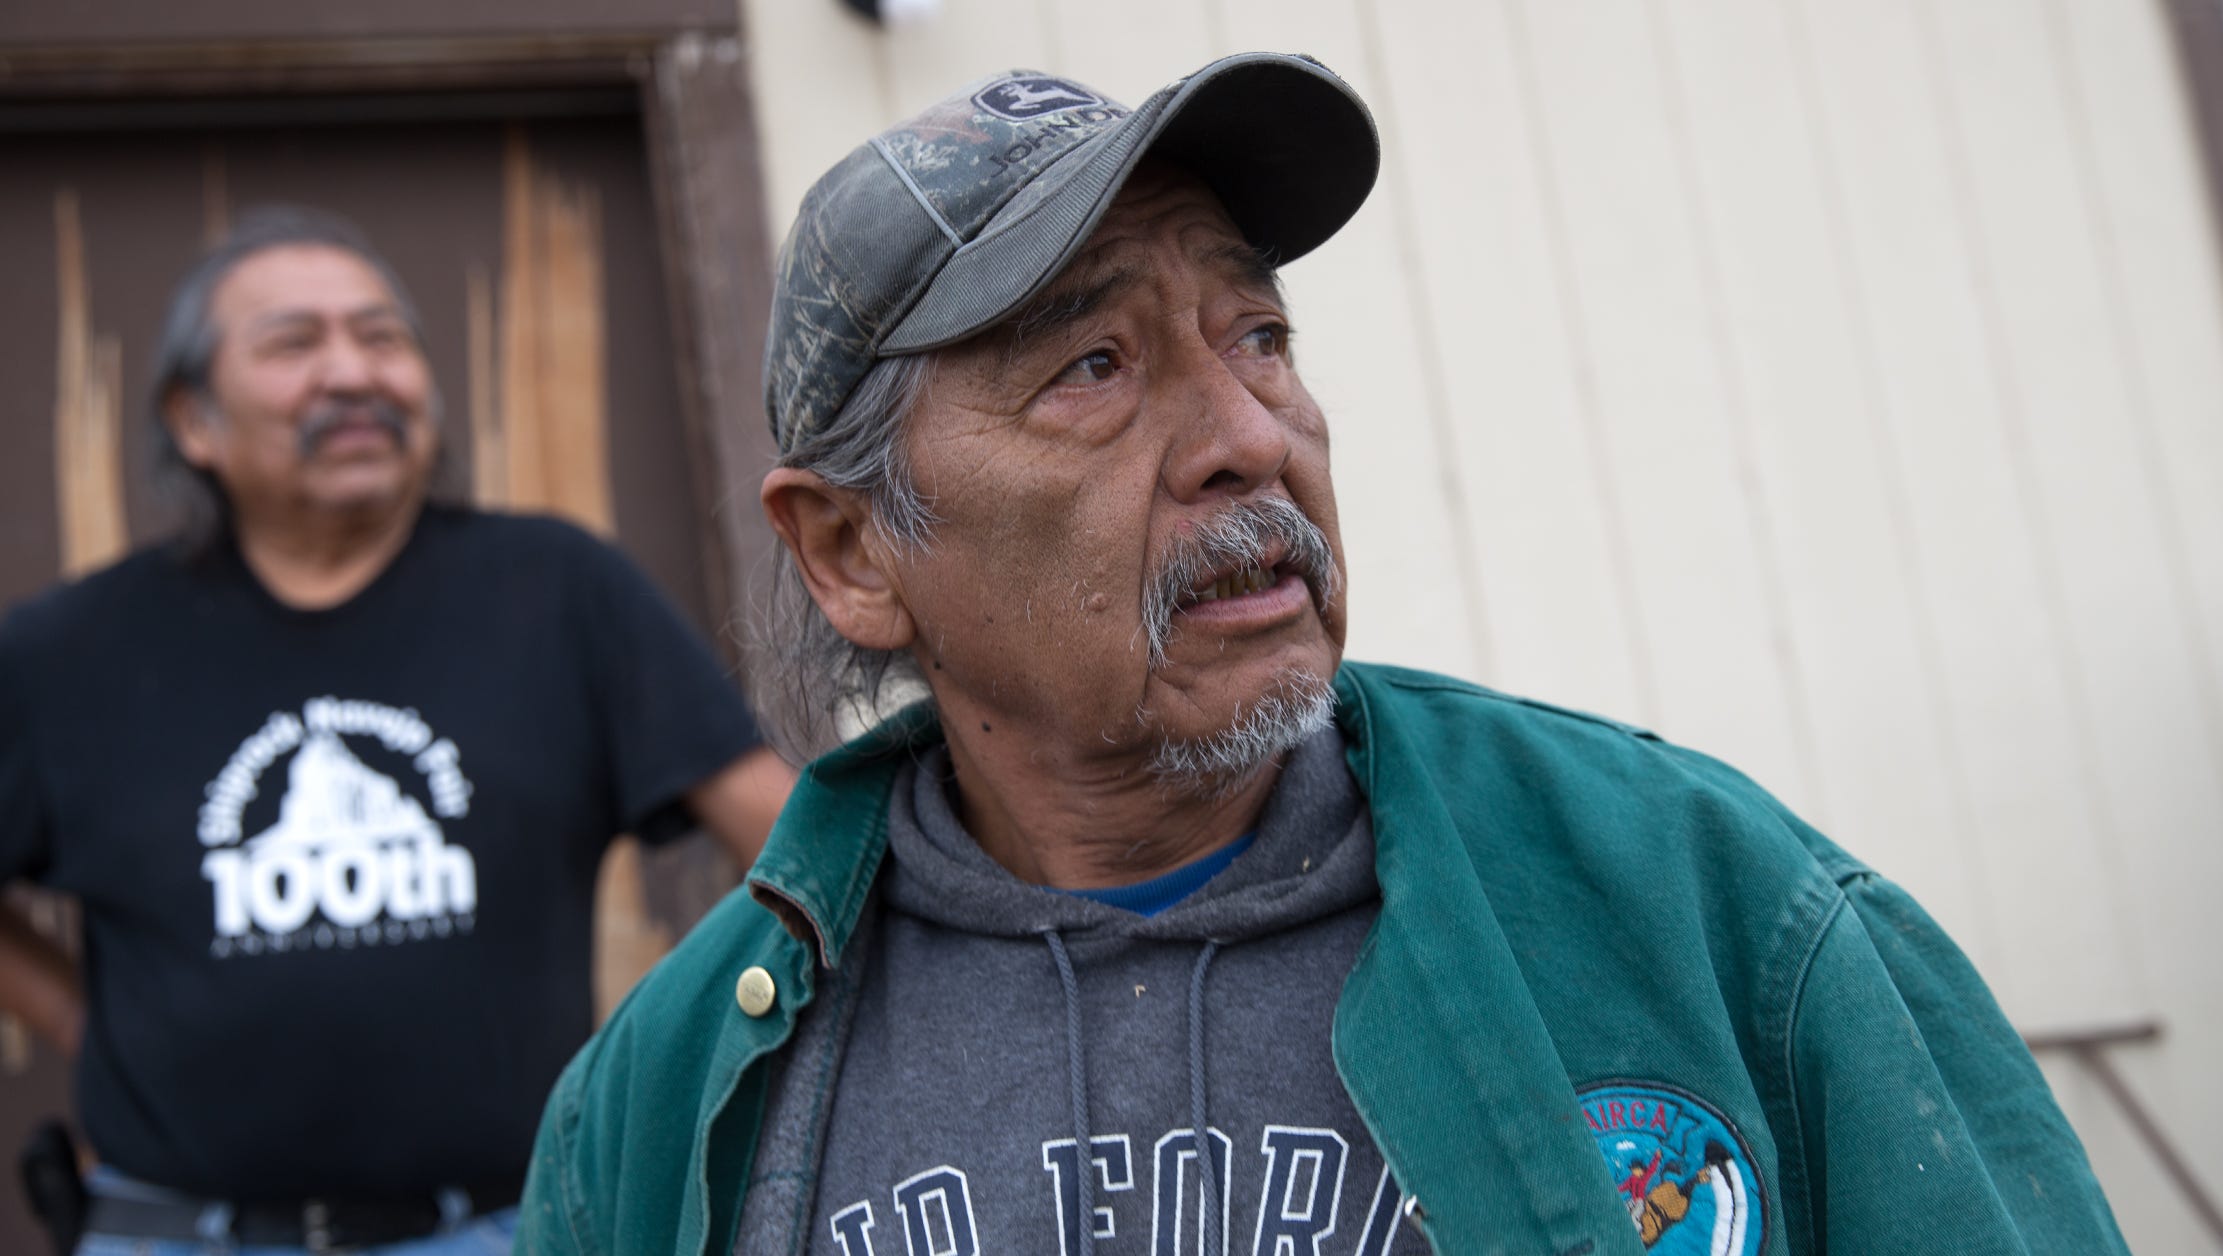 At right, Joe Ben Jr., a former Shiprock Chapter Farm Board member who served during the Gold King Mine spill, talks on Friday about his dissatisfaction with the U.S. Environmental Protection Agency after it announced it will not pay claims filed against it in response to the spill. Ben speaks at the farm of Earl Yazzie, pictured at left, in Shiprock.